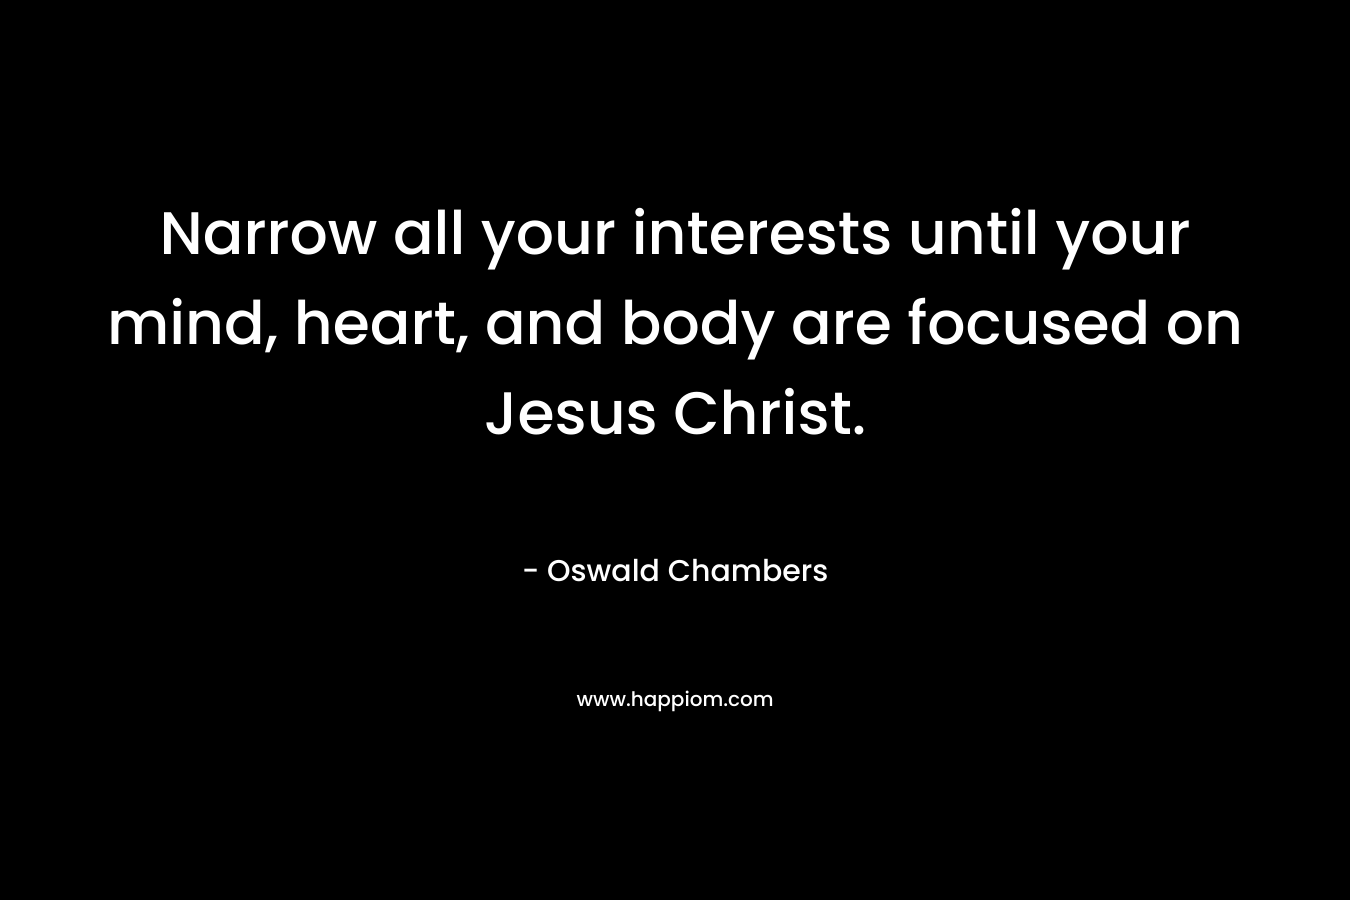 Narrow all your interests until your mind, heart, and body are focused on Jesus Christ.